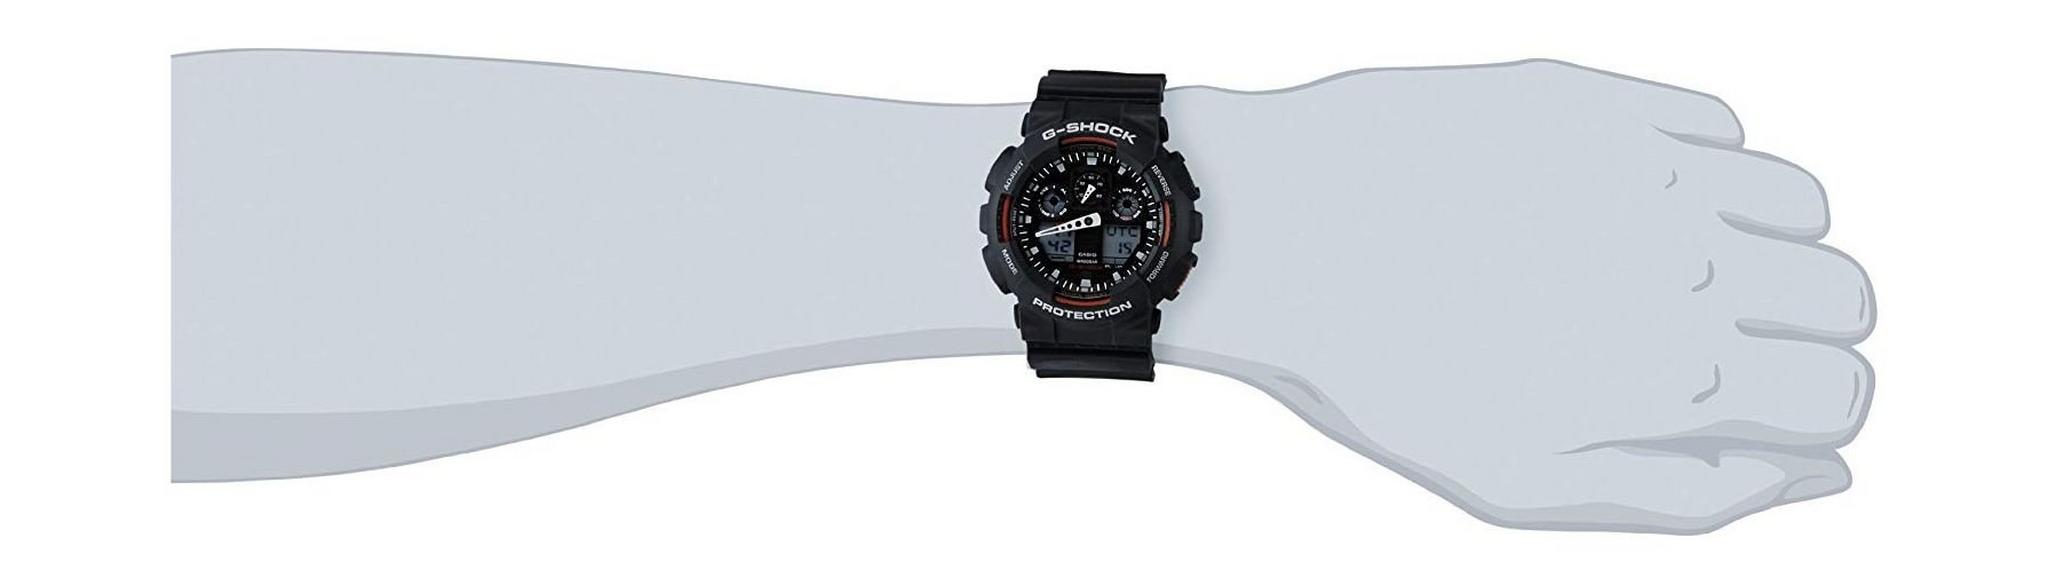 Casio G-Shock Resin Band Sport Watch For Men  (GA-100-1A4DR)